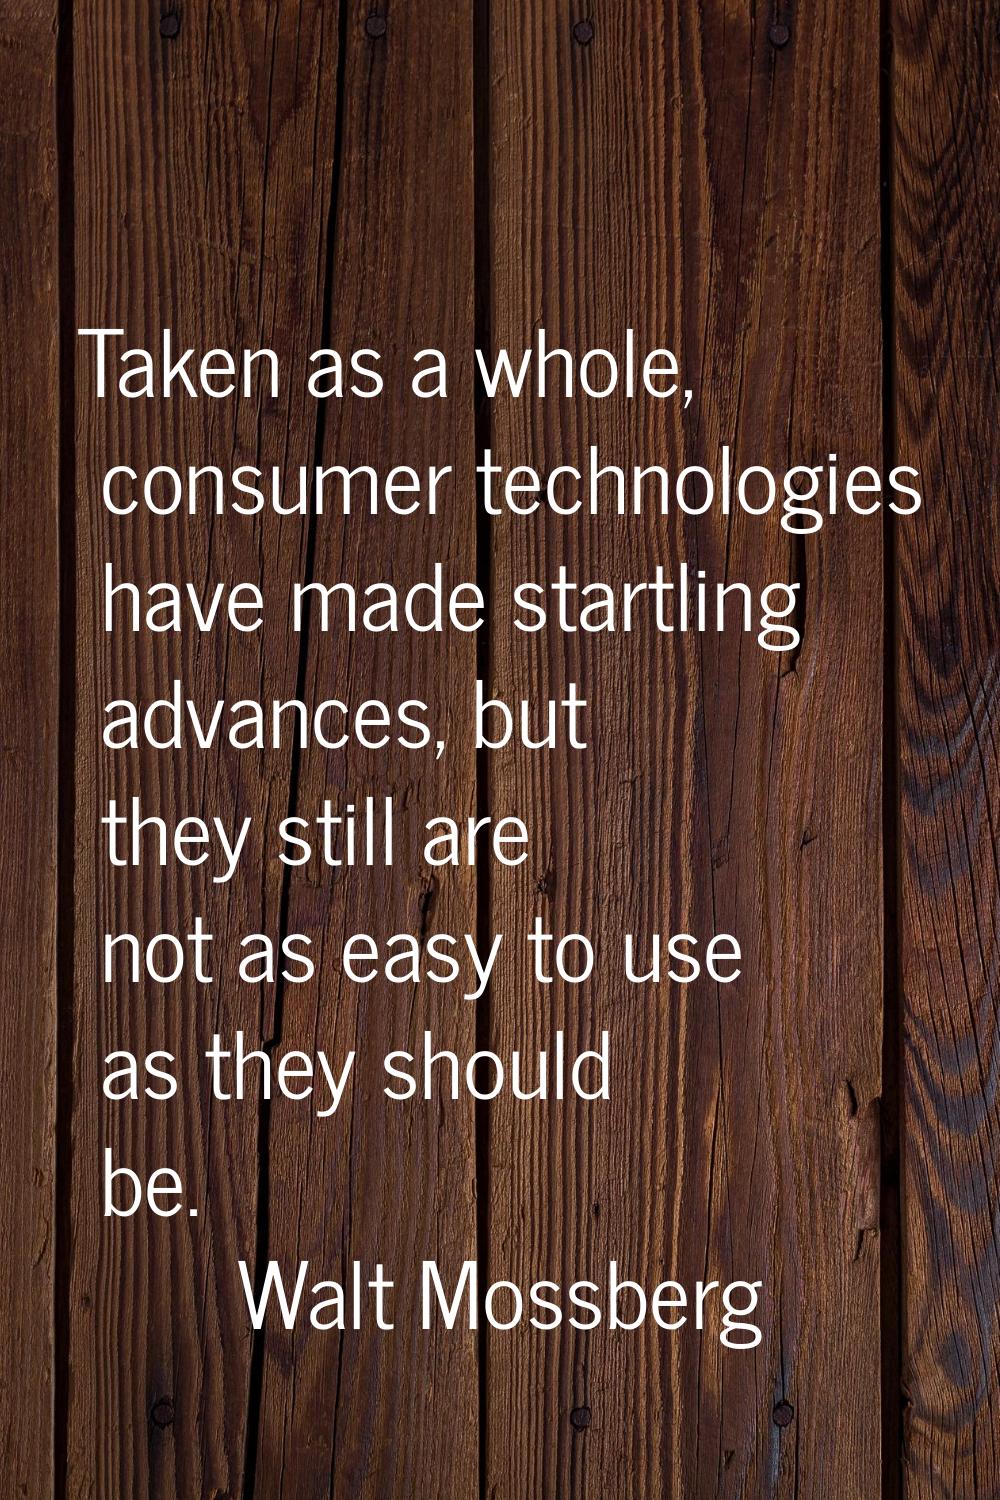 Taken as a whole, consumer technologies have made startling advances, but they still are not as eas